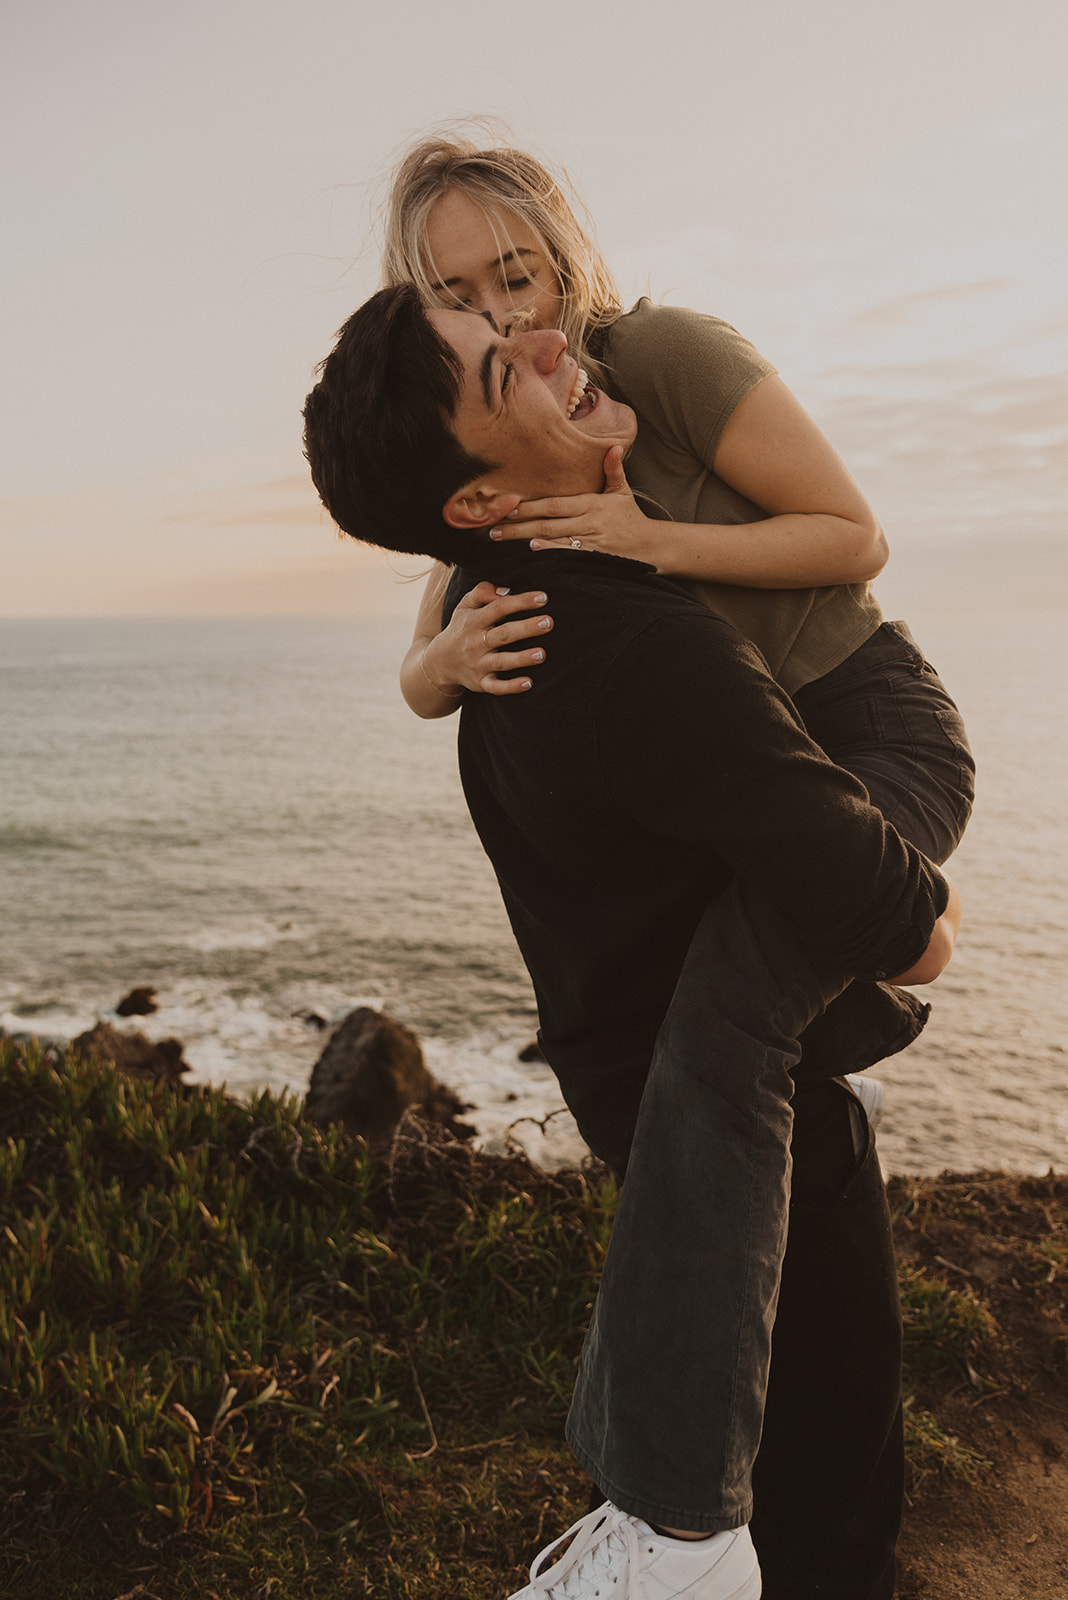 A couple who just got engaged celebrates on the coast of California